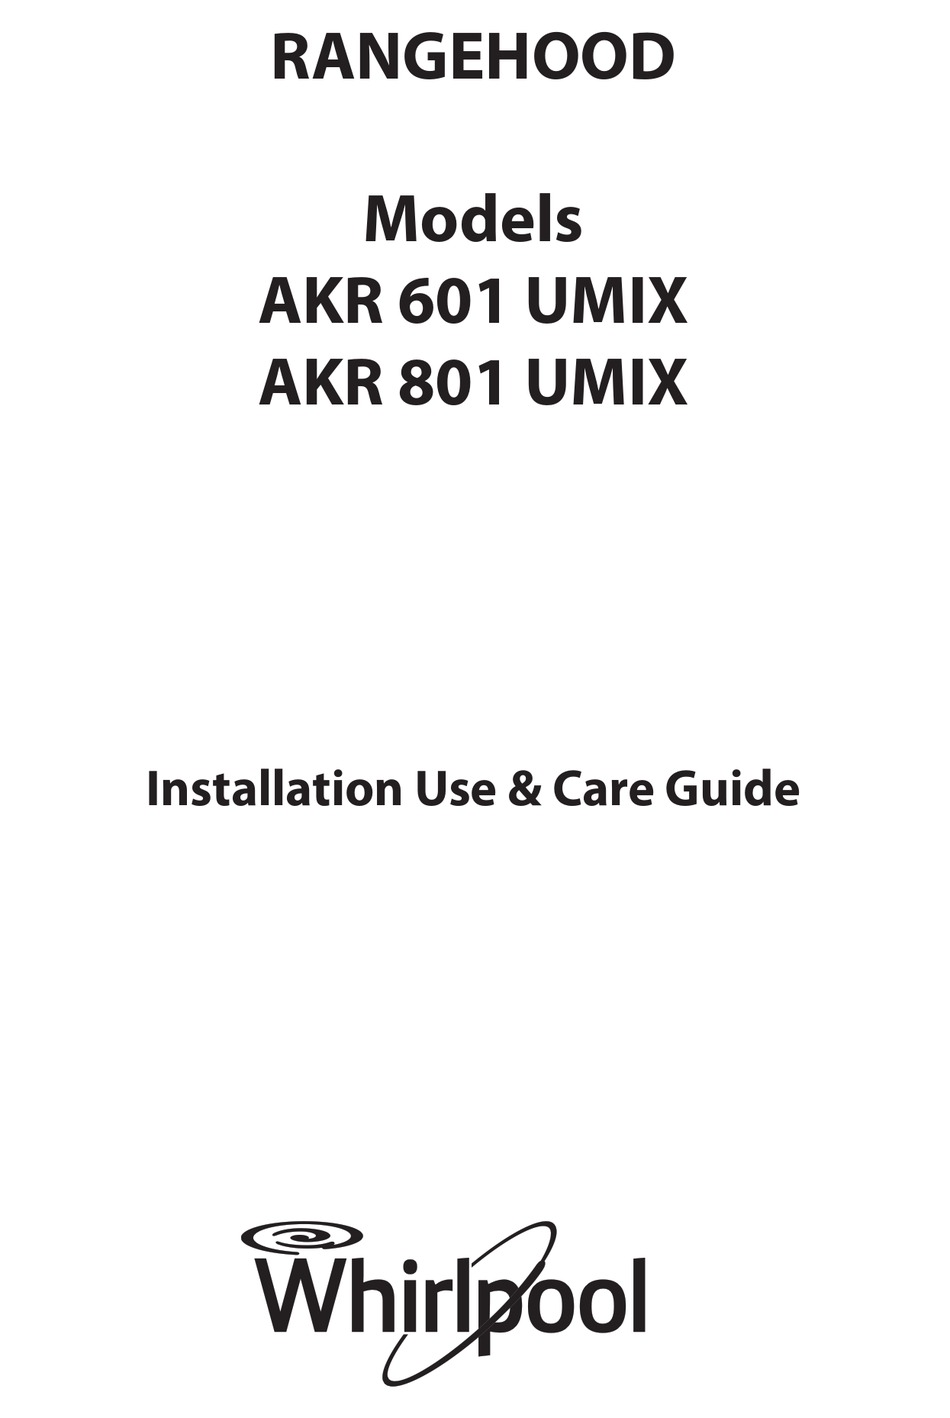 Product Sheet; Control Panel; Replacing Bulbs - Whirlpool AKR 601 UMIX  Installation, Use And Care Manual [Page 8]  ManualsLib